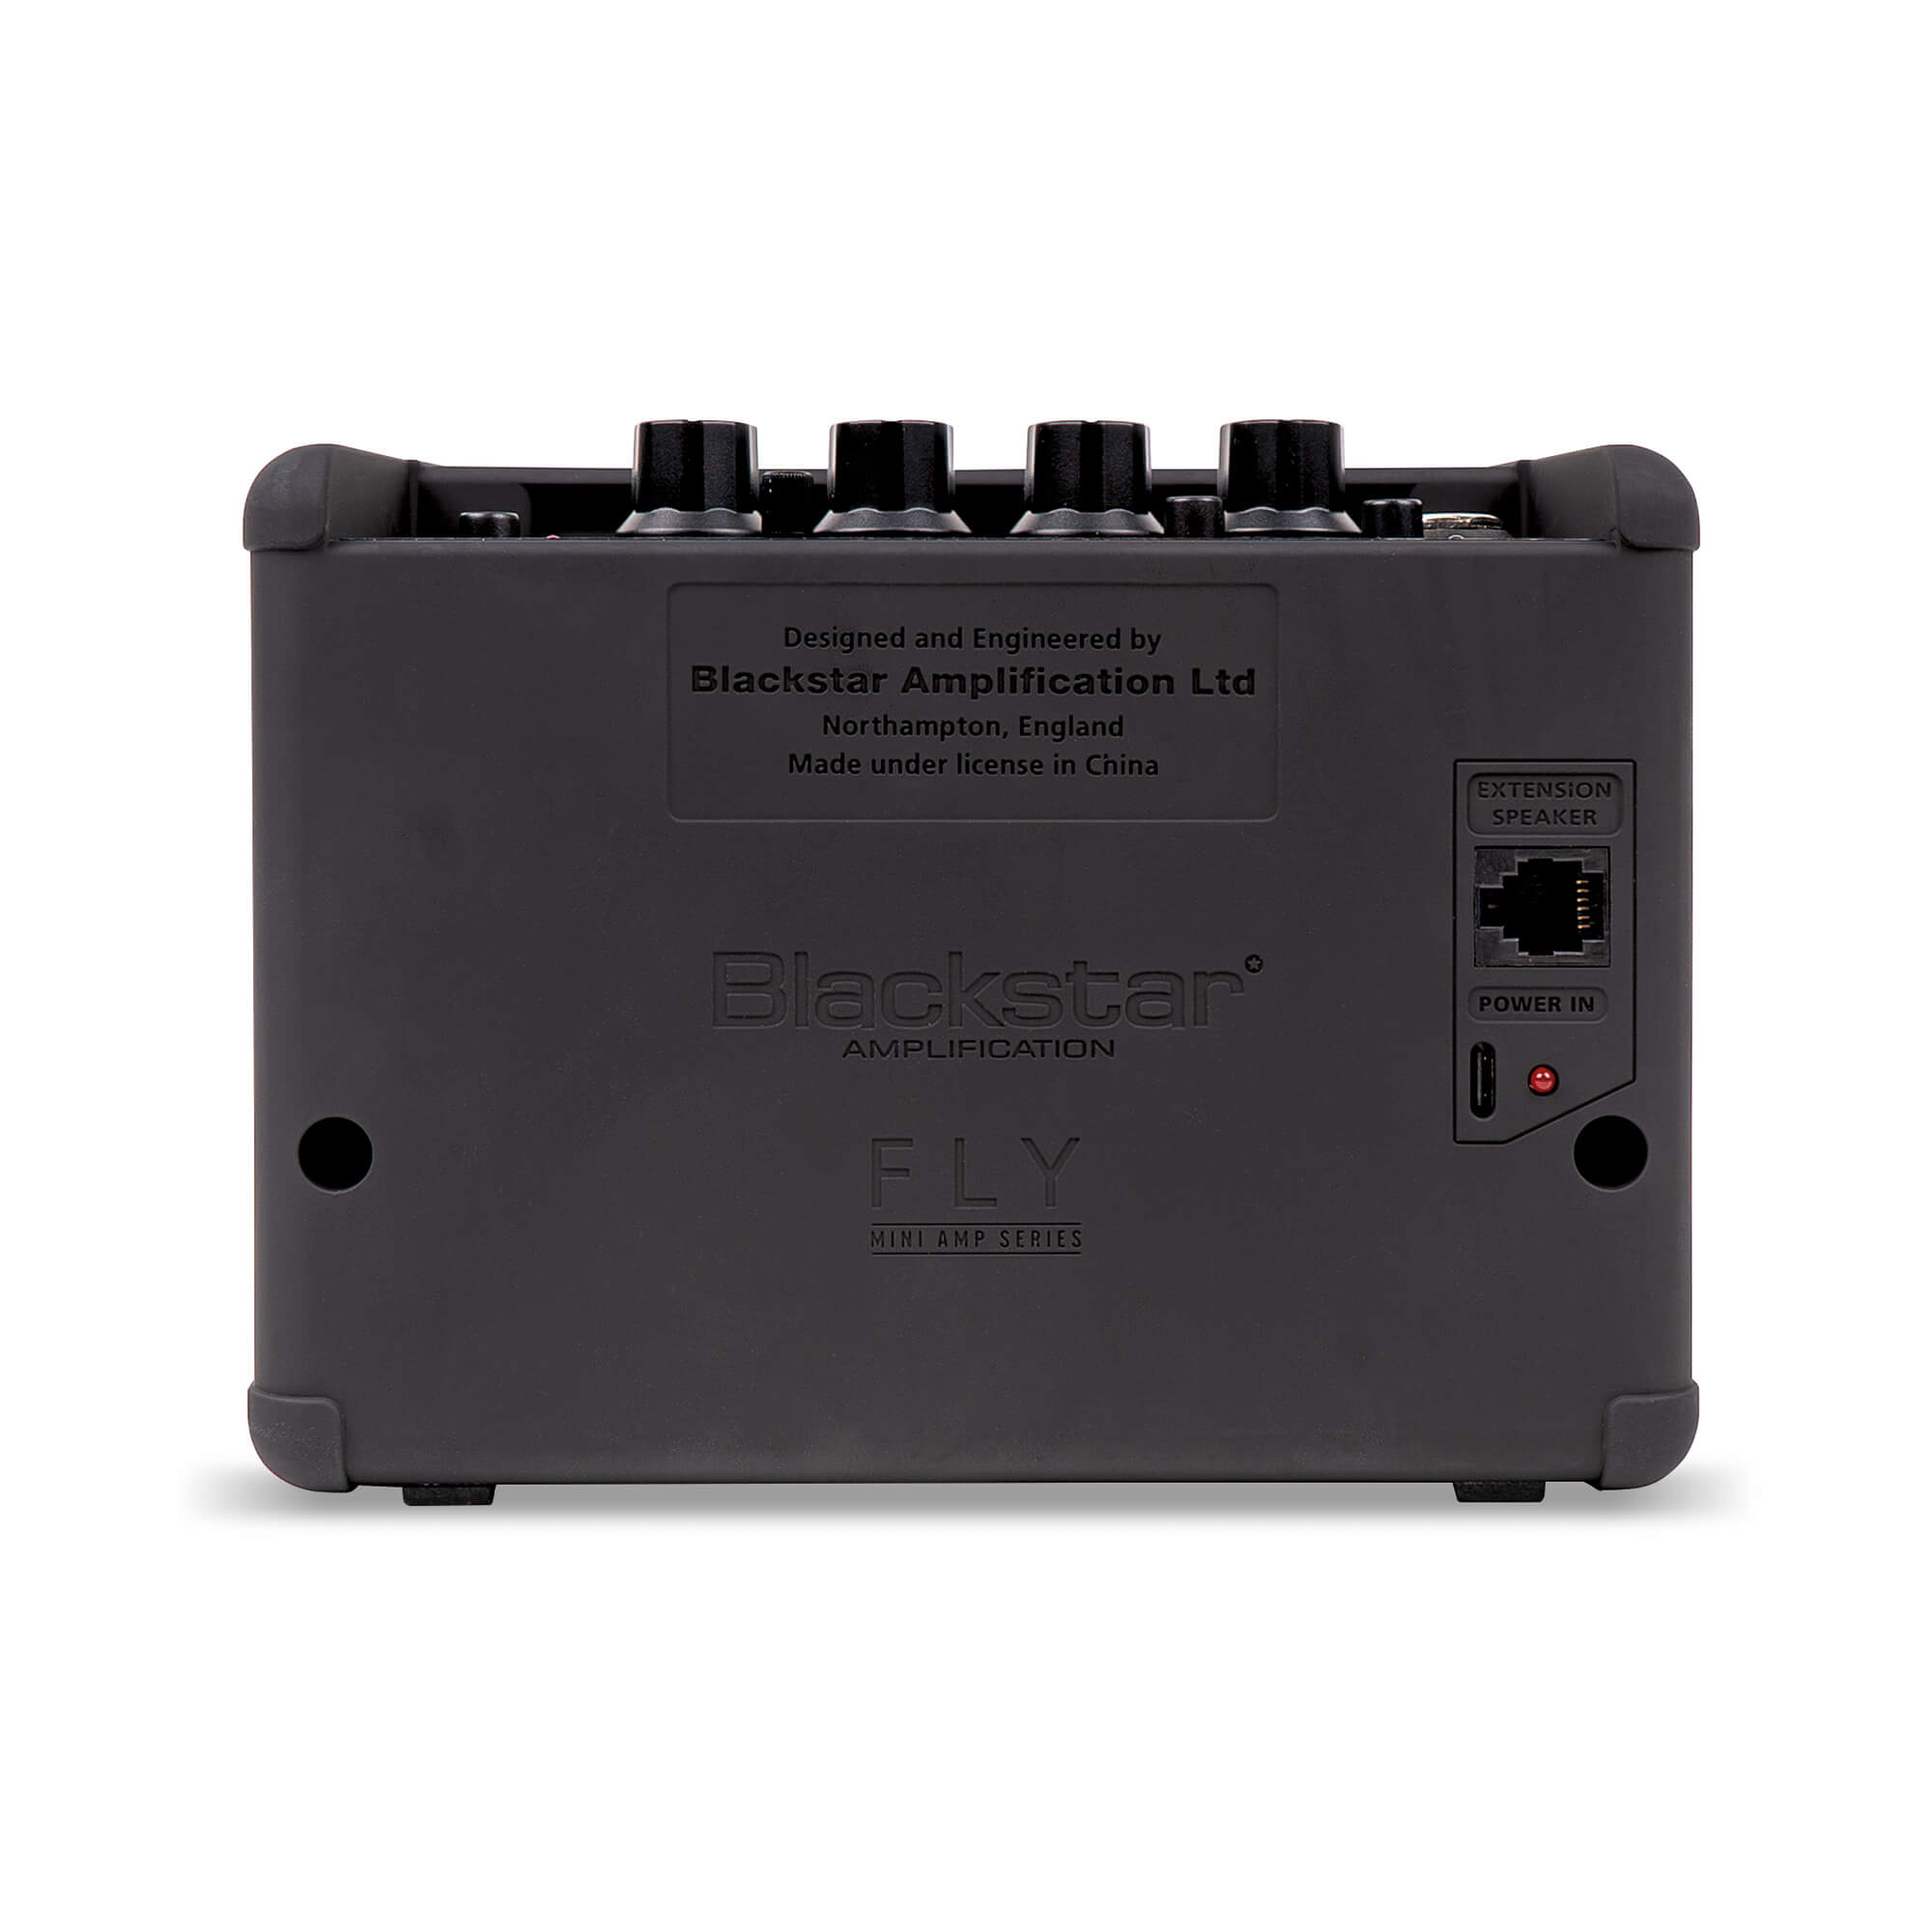 Blackstar Amps FLY 3 Charge mini guitar amplifier back